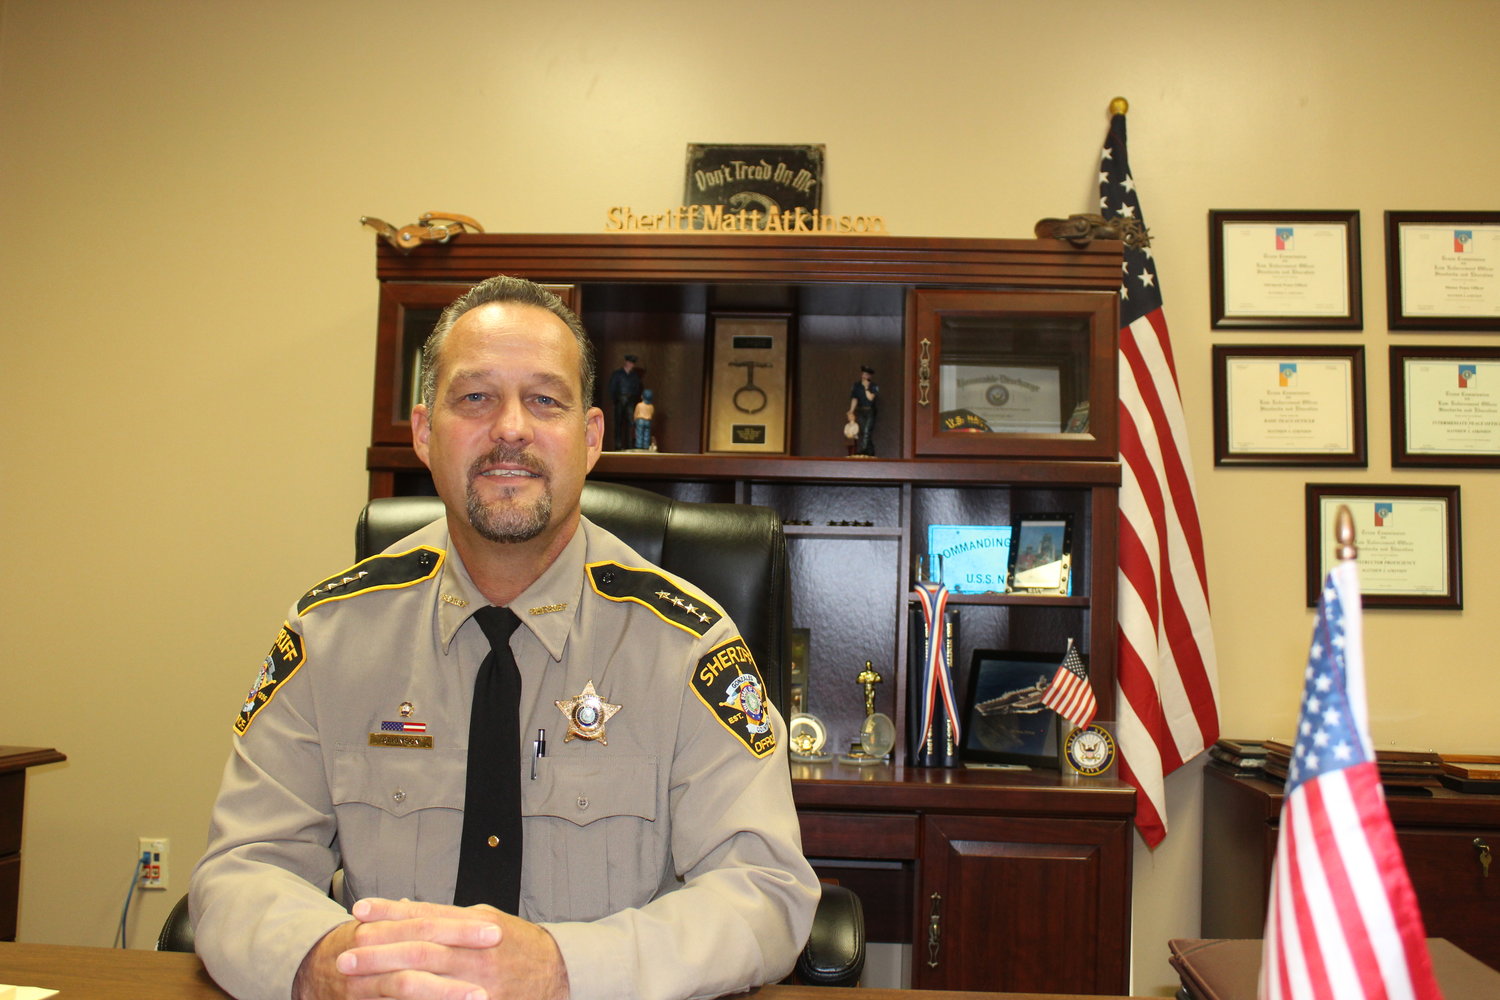 Gonzales County Sheriff Matt Atkinson announced last week that he is going to seek a second term as sheriff in the 2020 election.